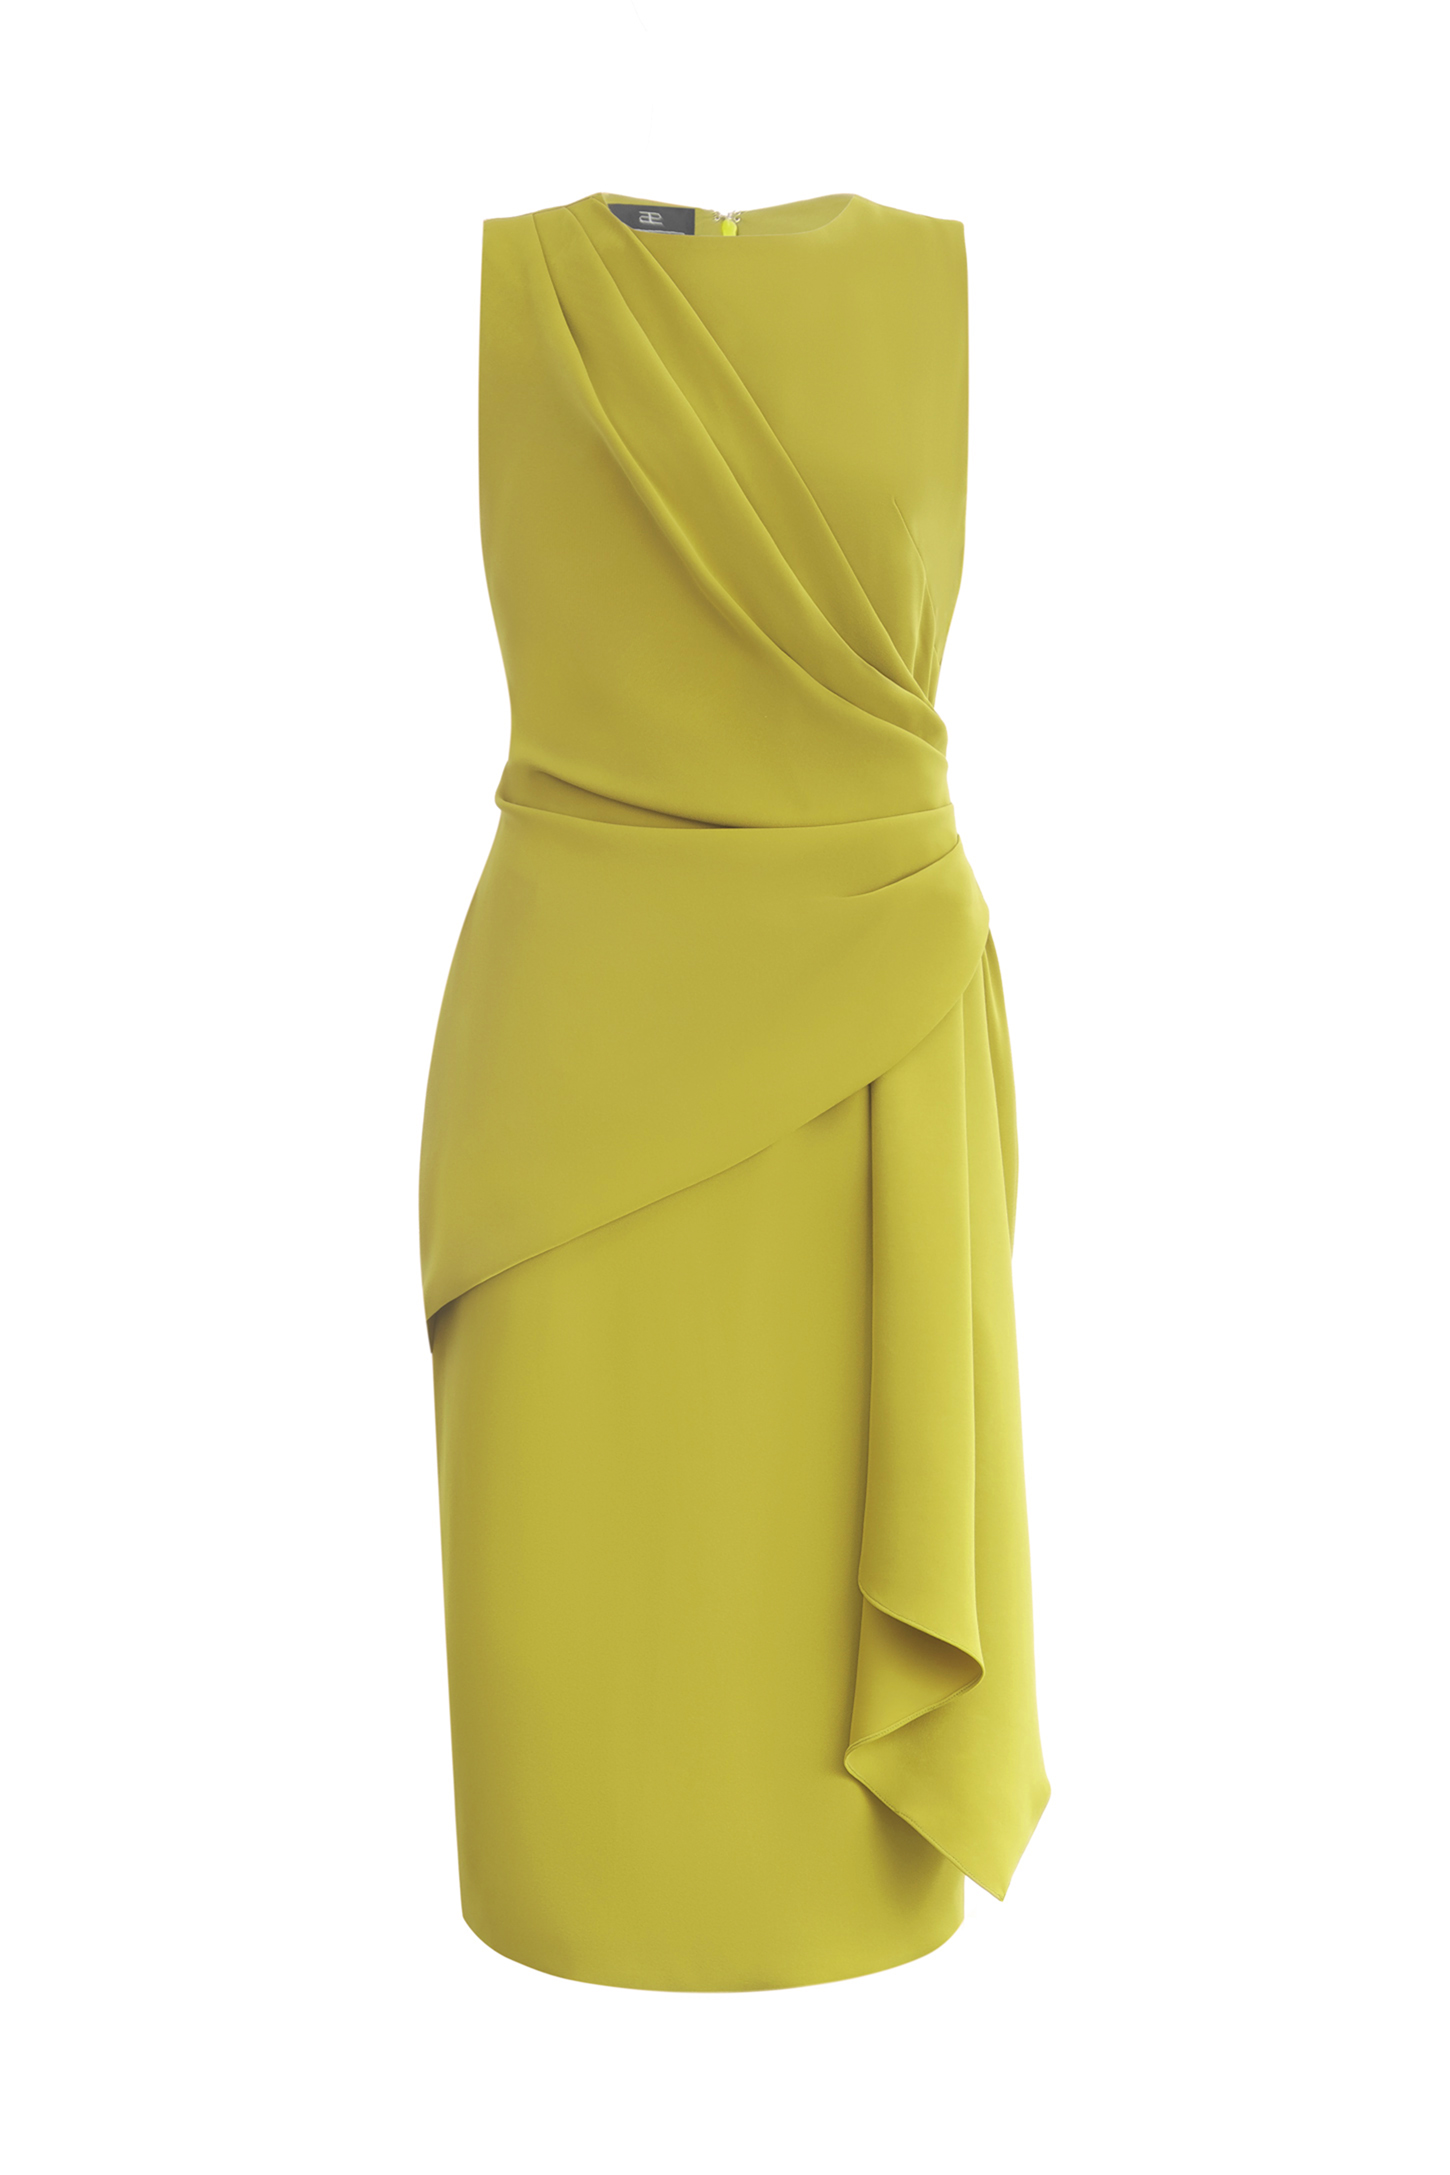 The Quincy Dress in Lime - Atelier Patty Ang